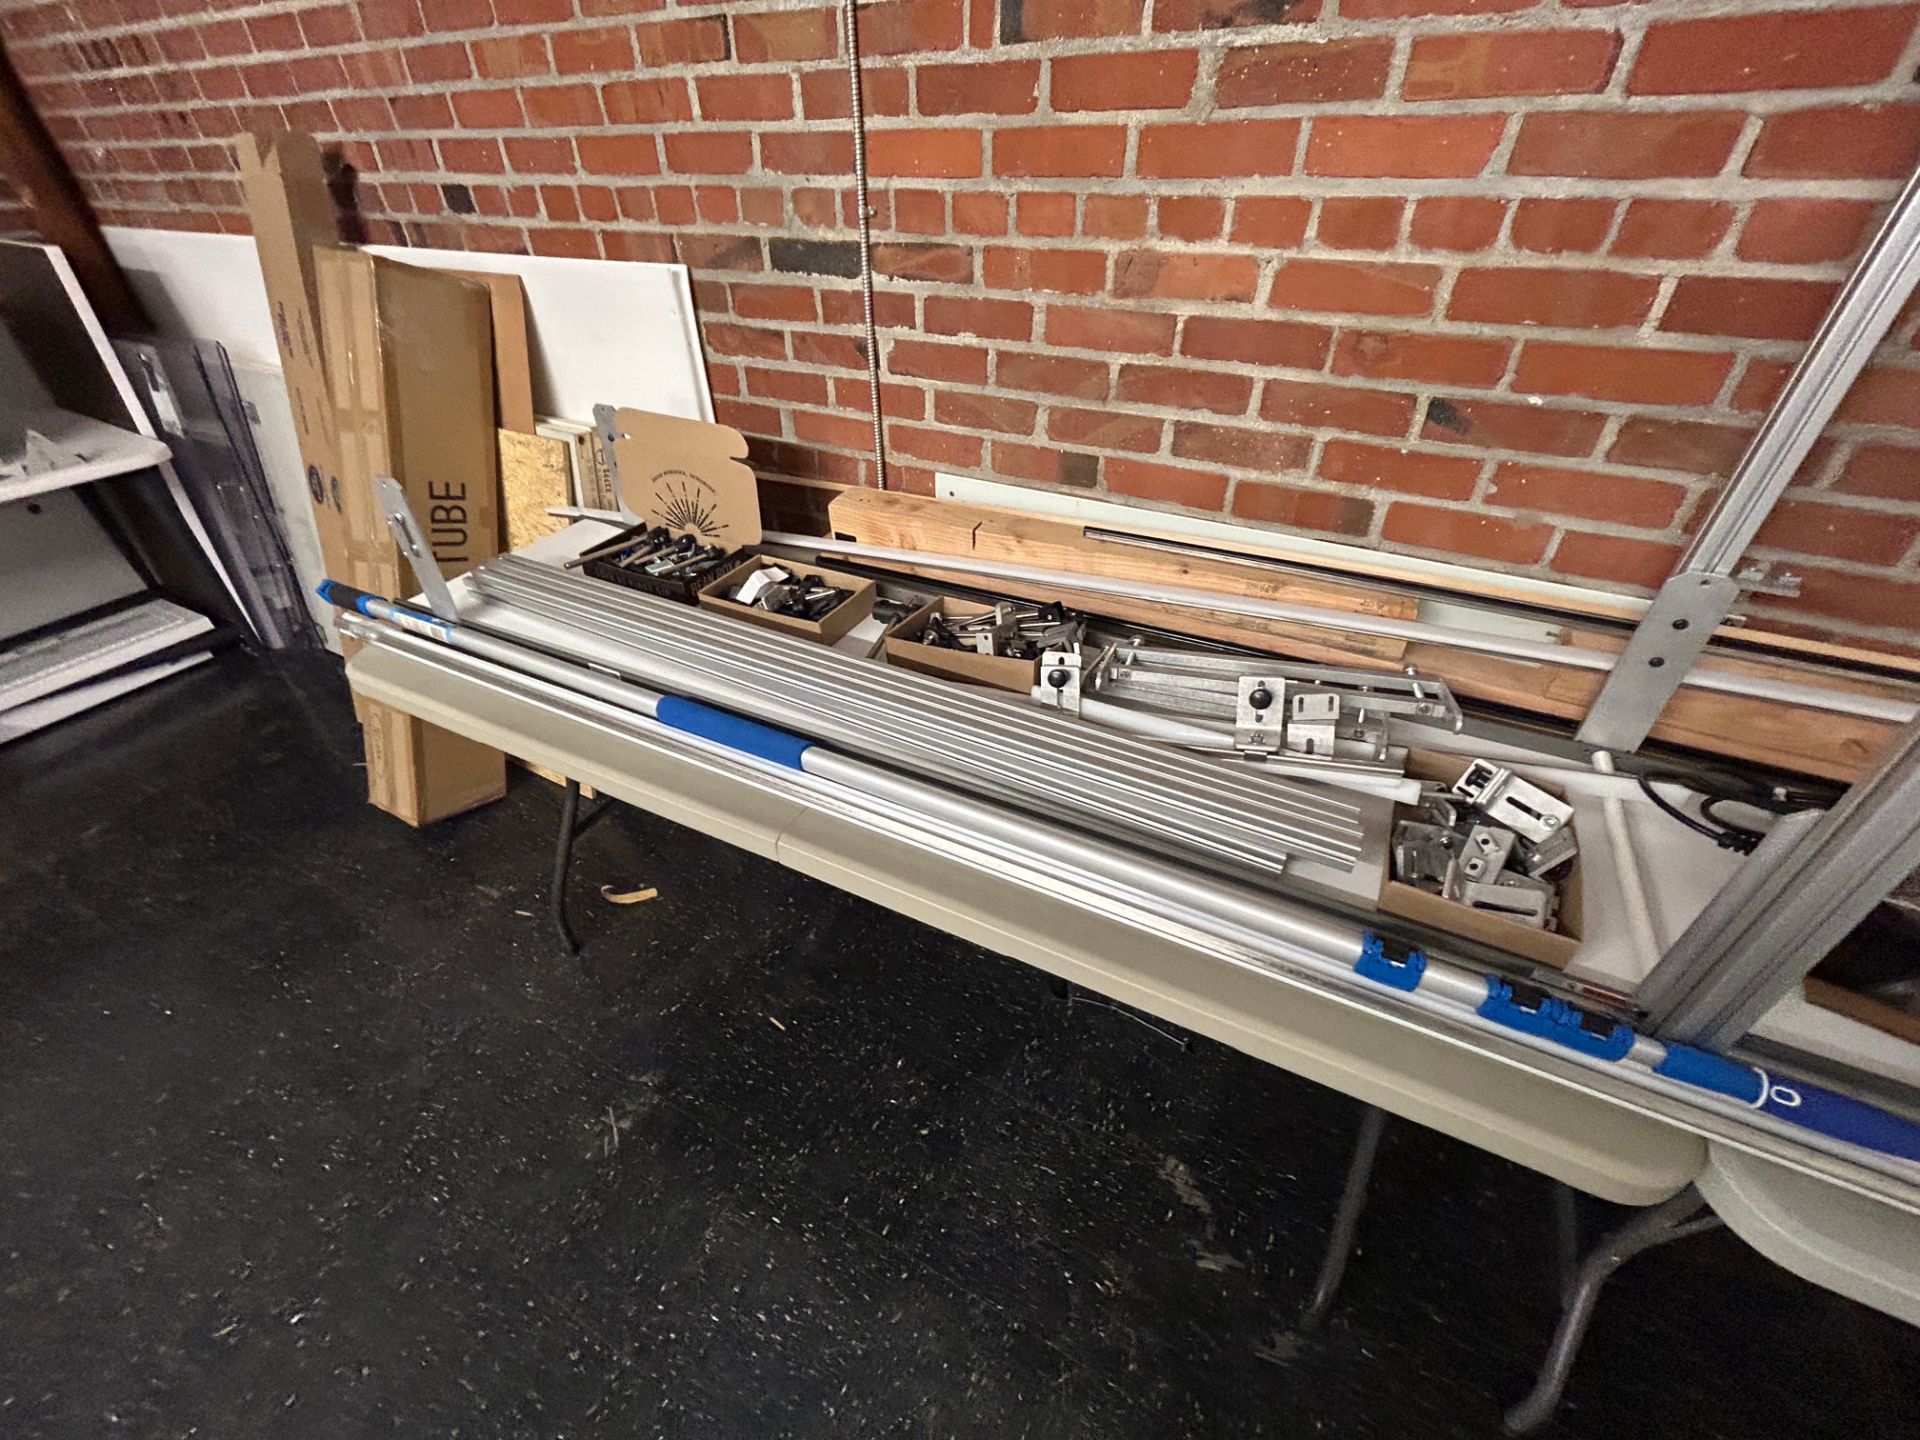 Lot - Including a Complete Adjustable Flat Belt Conveyor and Misc. Additional Parts, Connections, To - Image 4 of 7